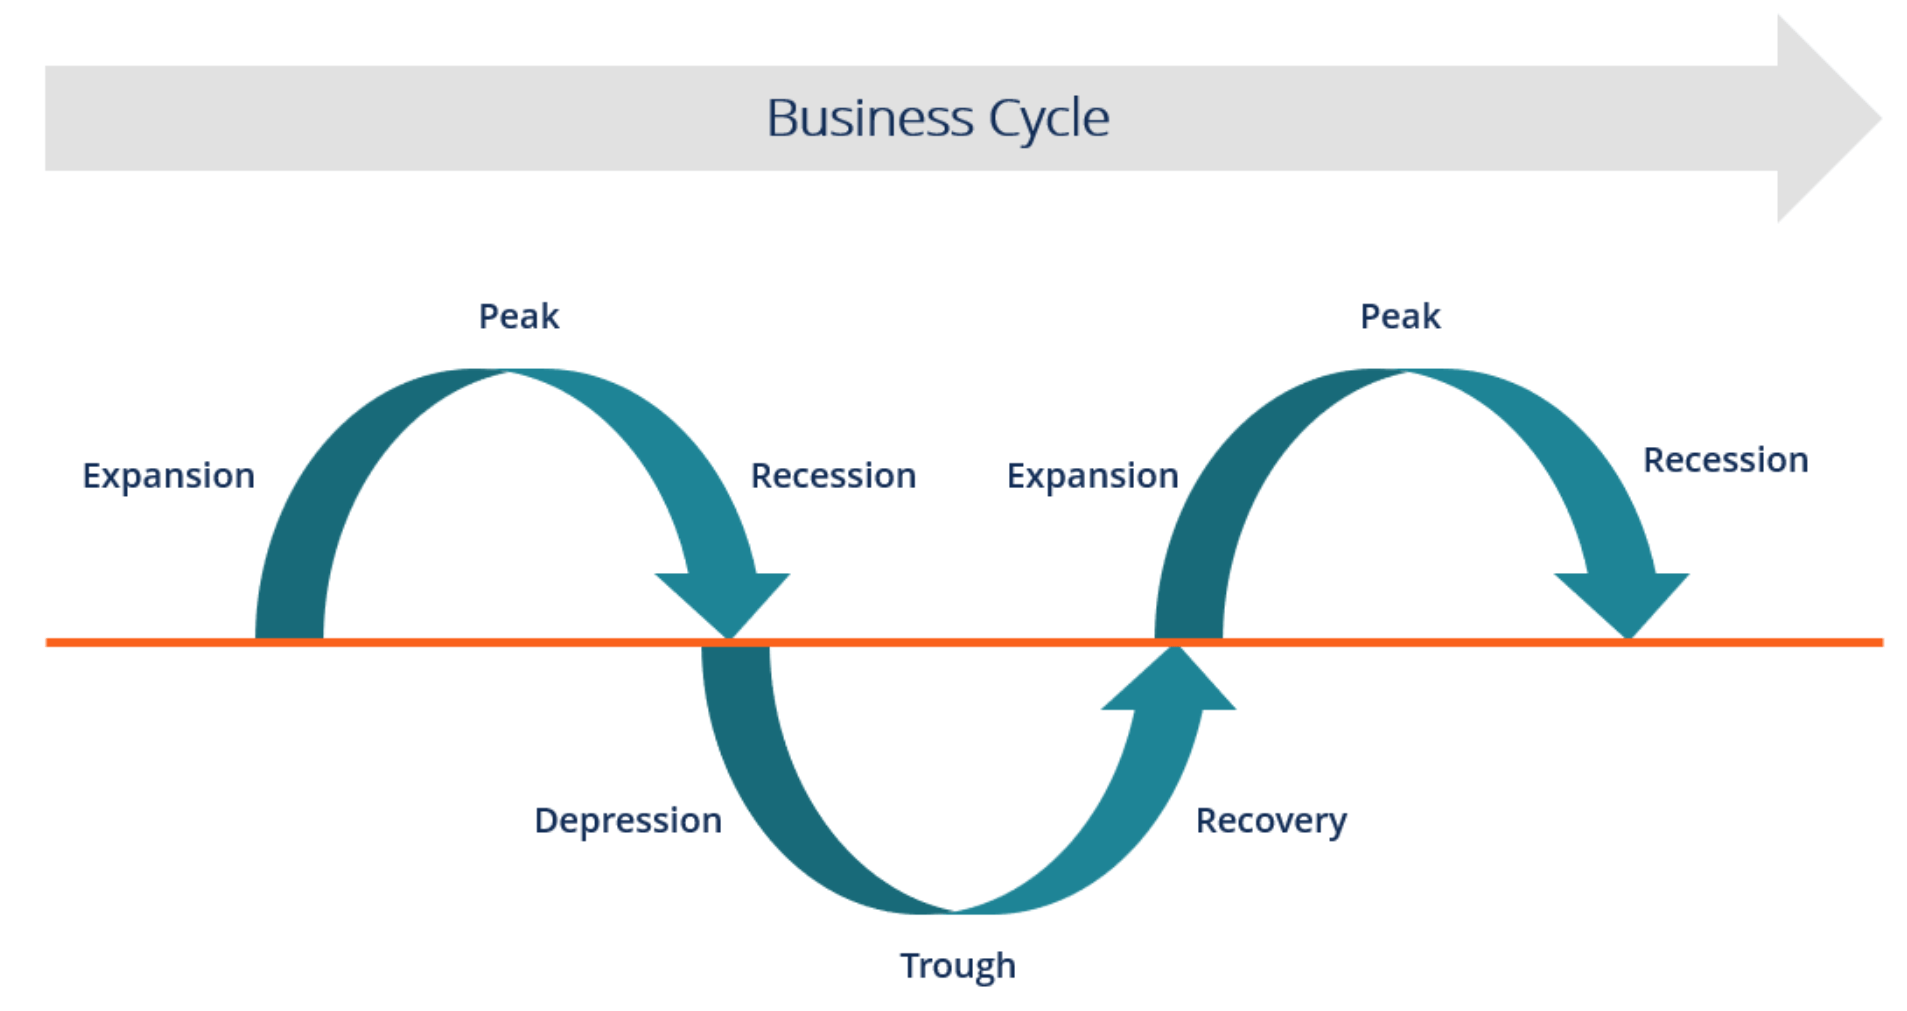 Financial business cycles